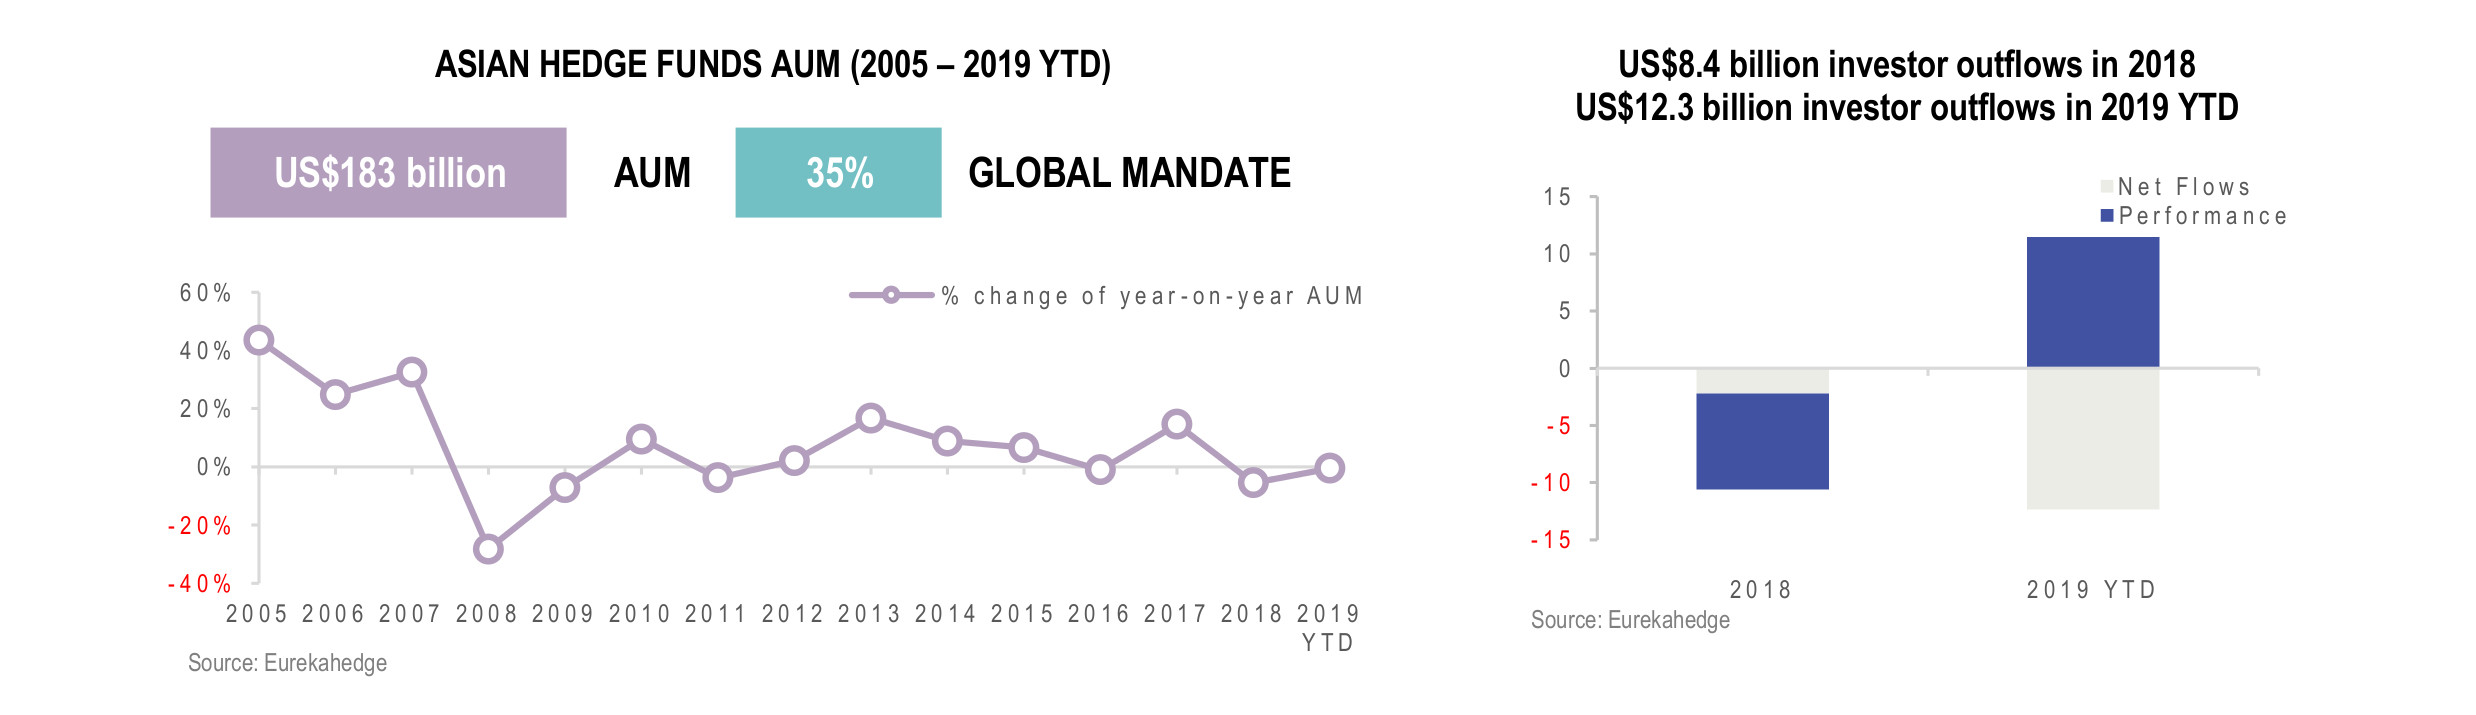 Asian Hedge Funds Infographic January 2020 - AUM